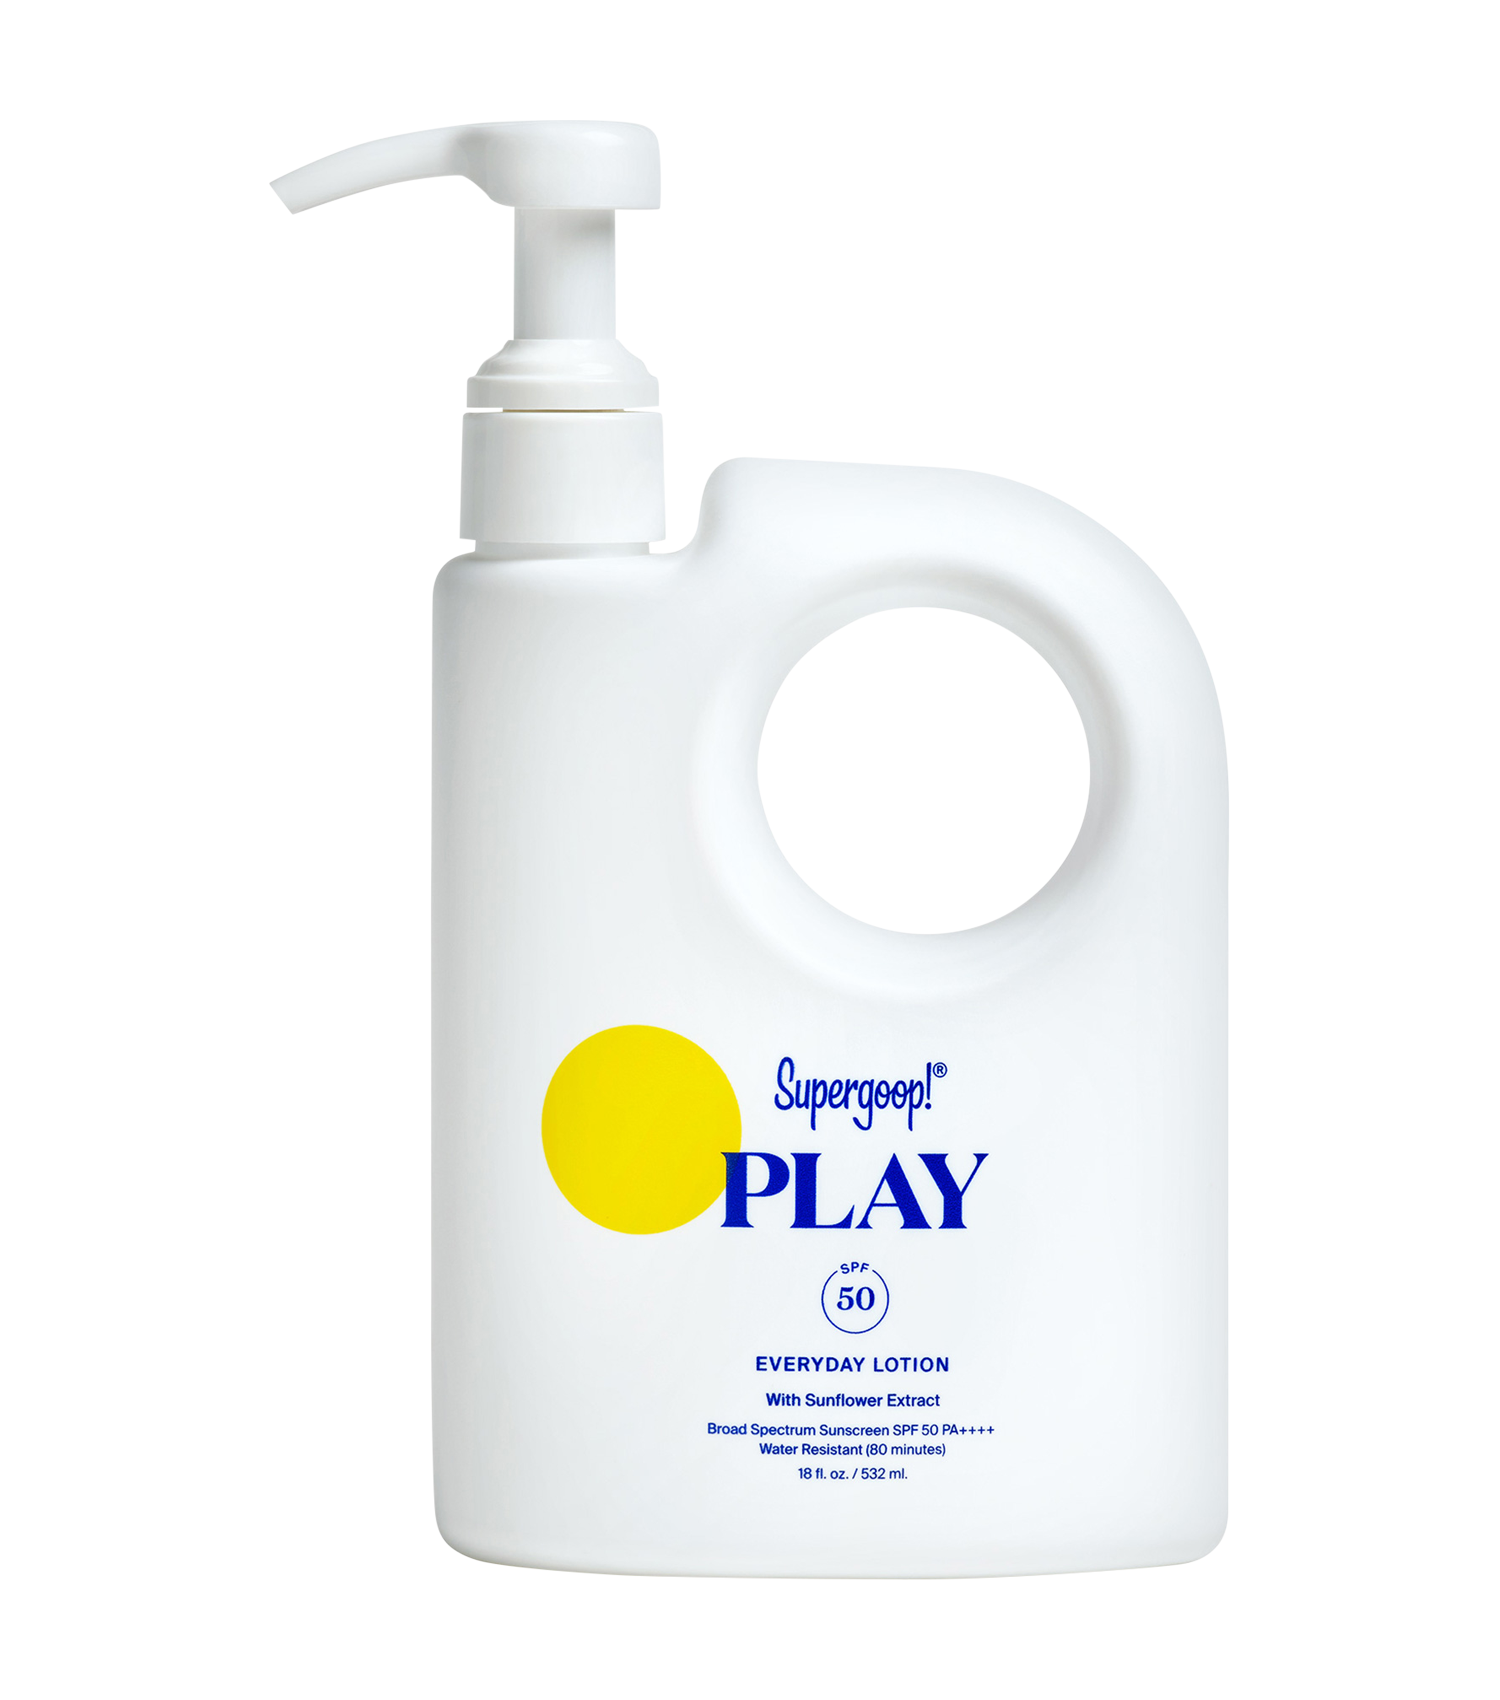 Supergoop! PLAY Everyday Lotion SPF 50 with Sunflower Extract - 18 oz.  1